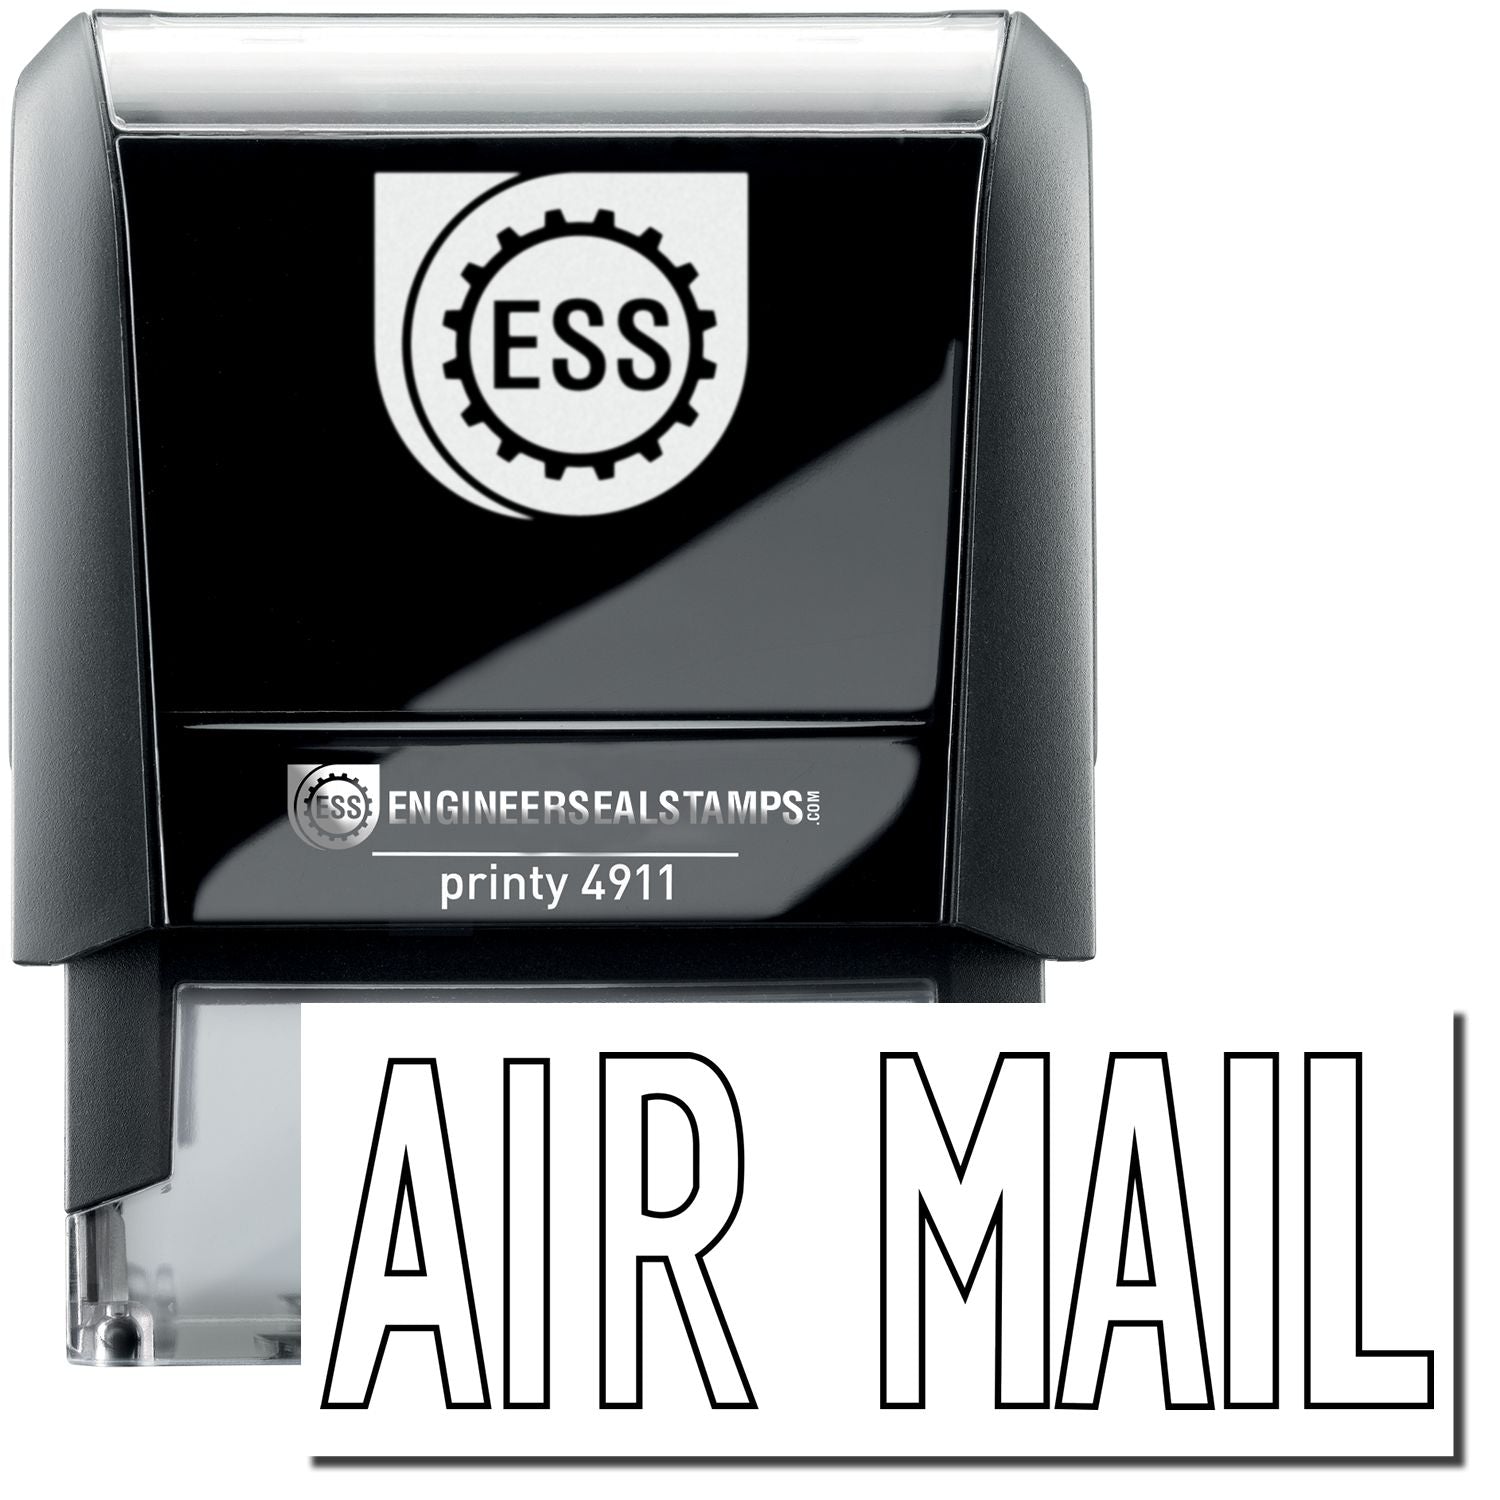 A self-inking stamp with a stamped image showing how the text "AIR MAIL" in an outline style is displayed after stamping.